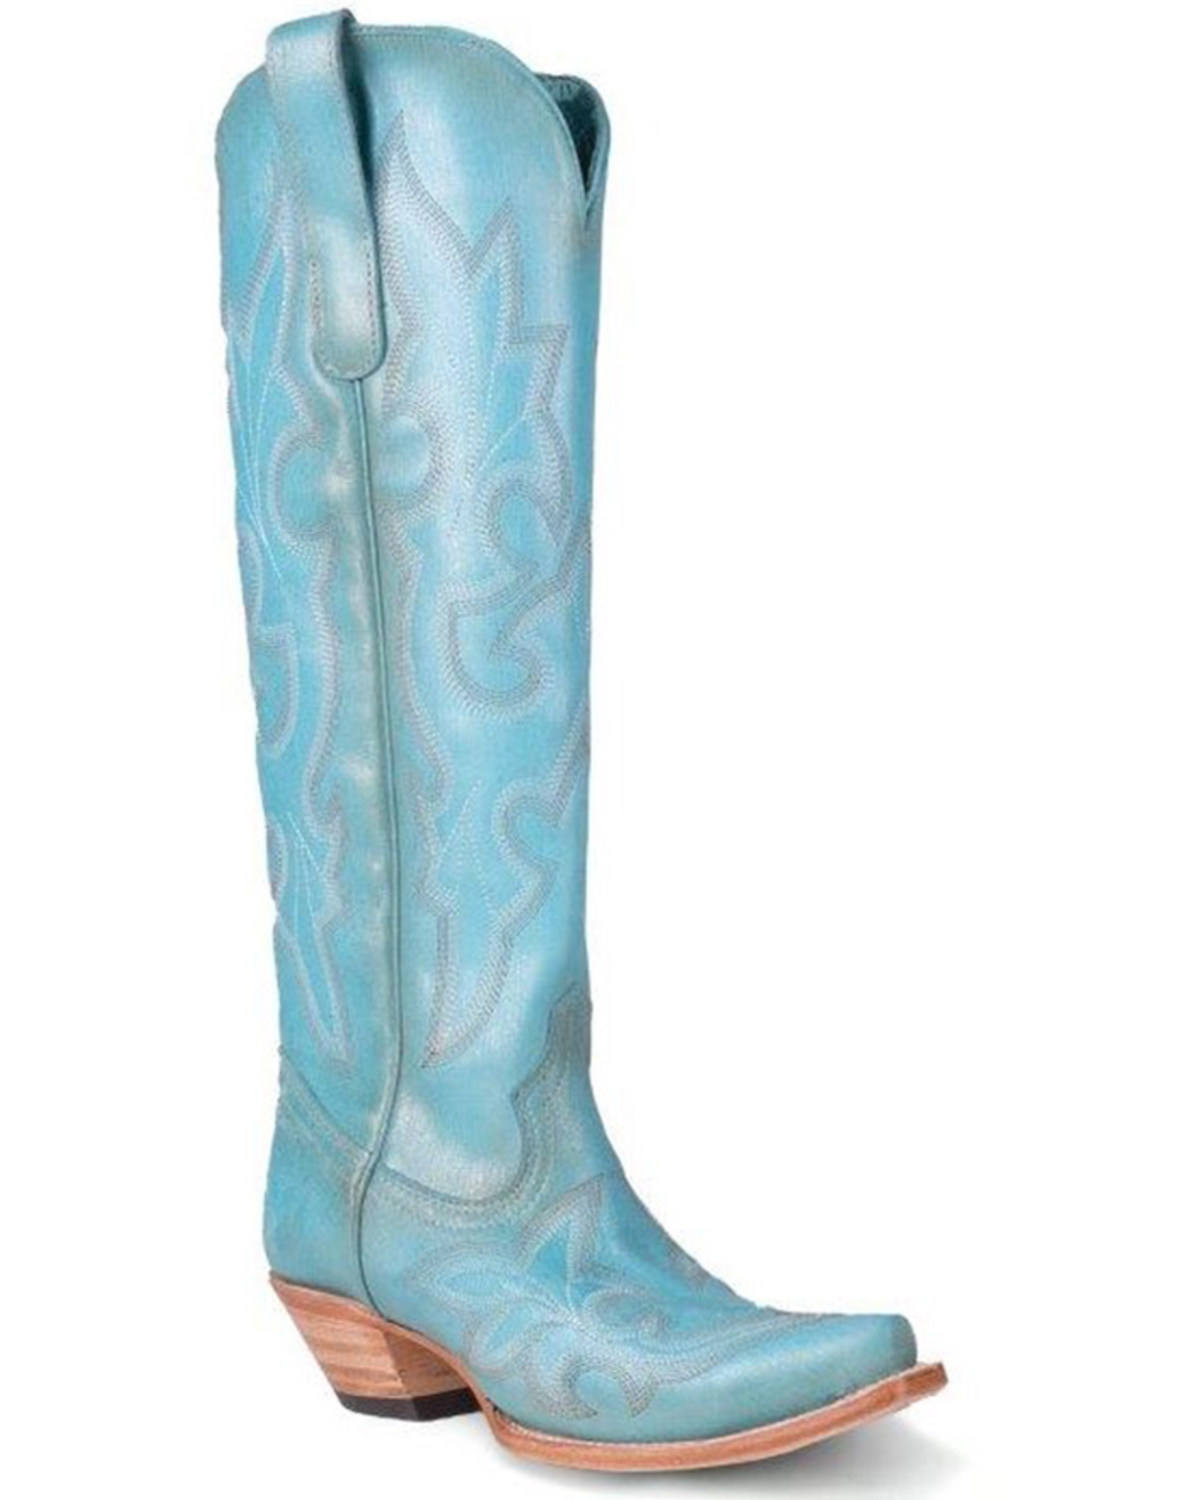 Corral Women's Embroidered Tall Western Boots - Snip Toe